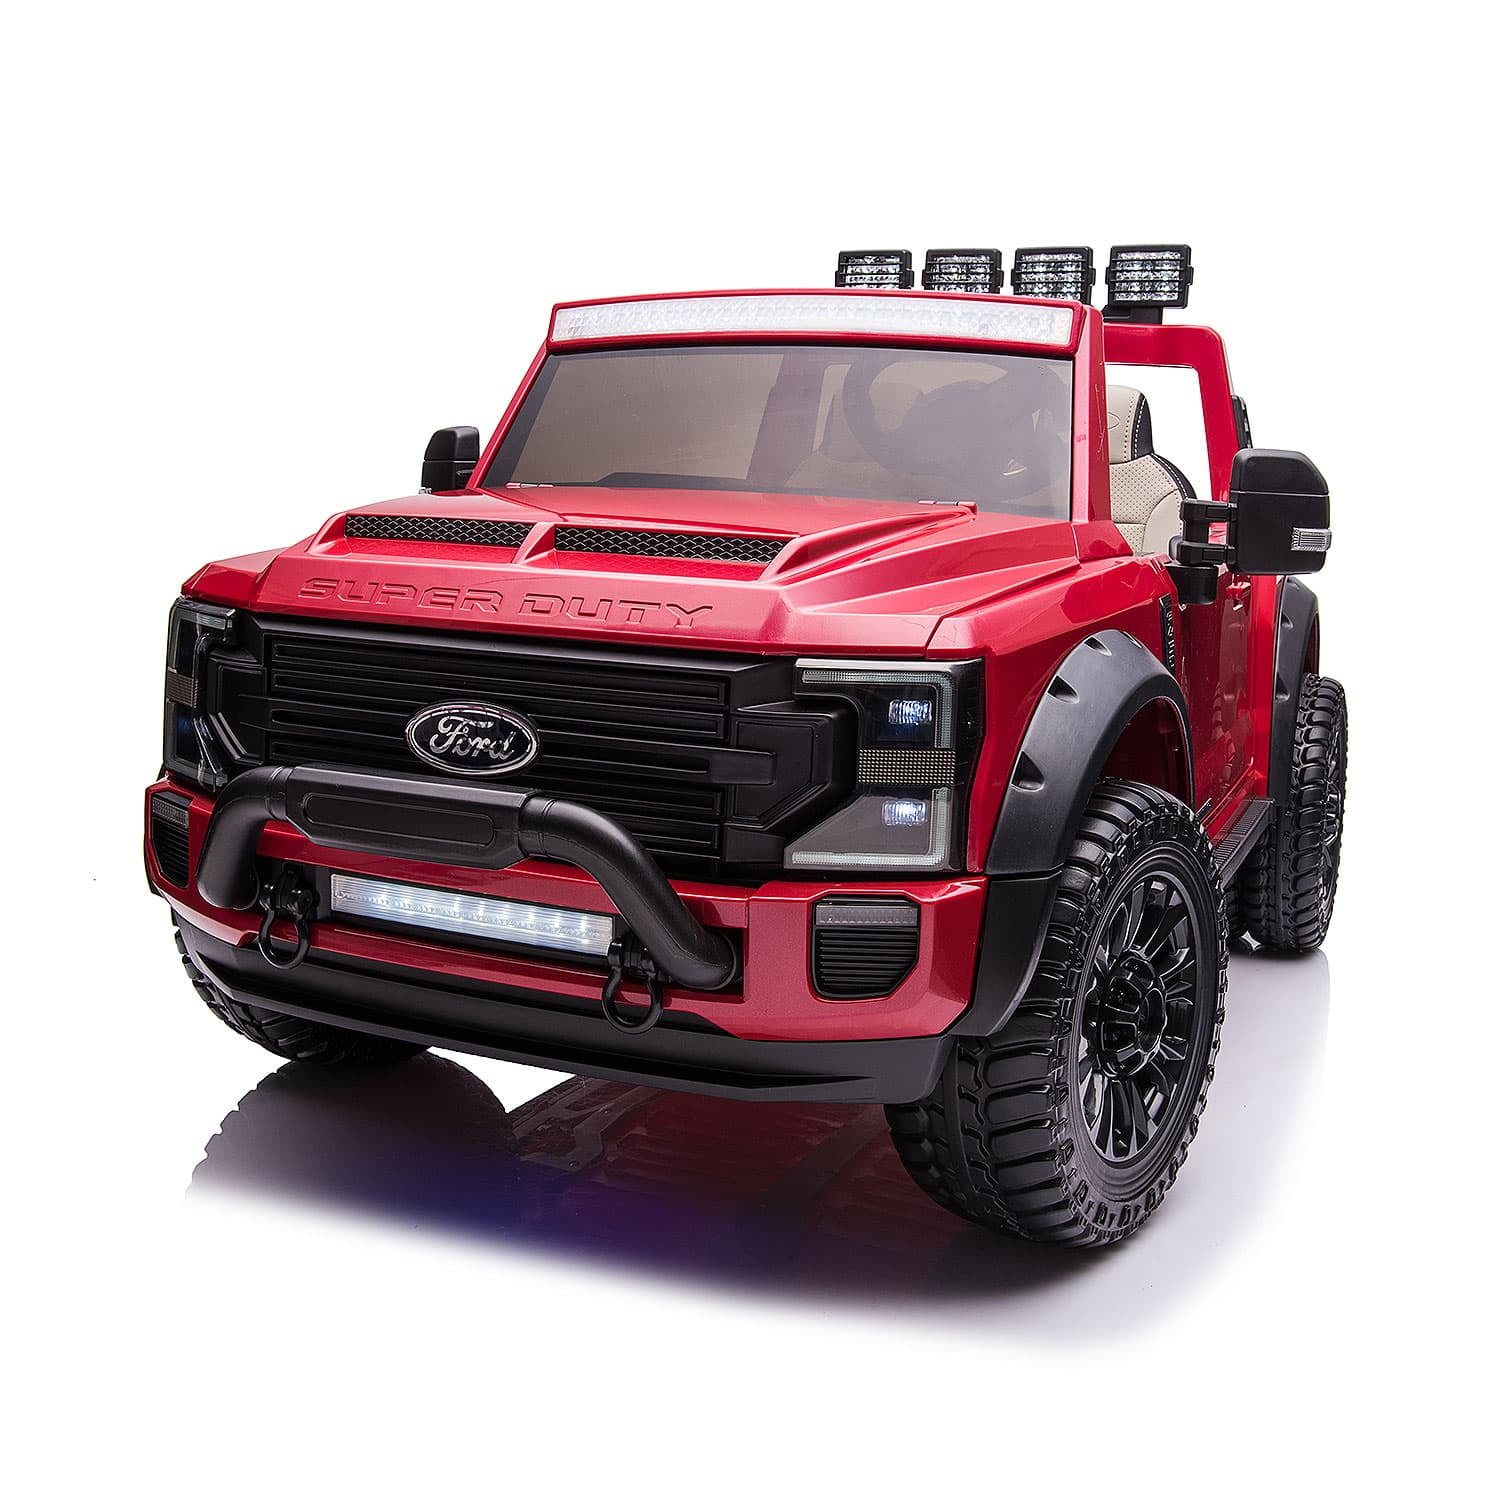 PERSONALISED NUMBER PLATES EXACT FIT KID FORD RANGER RAPTOR ELECTRIC RIDE ON CAR 